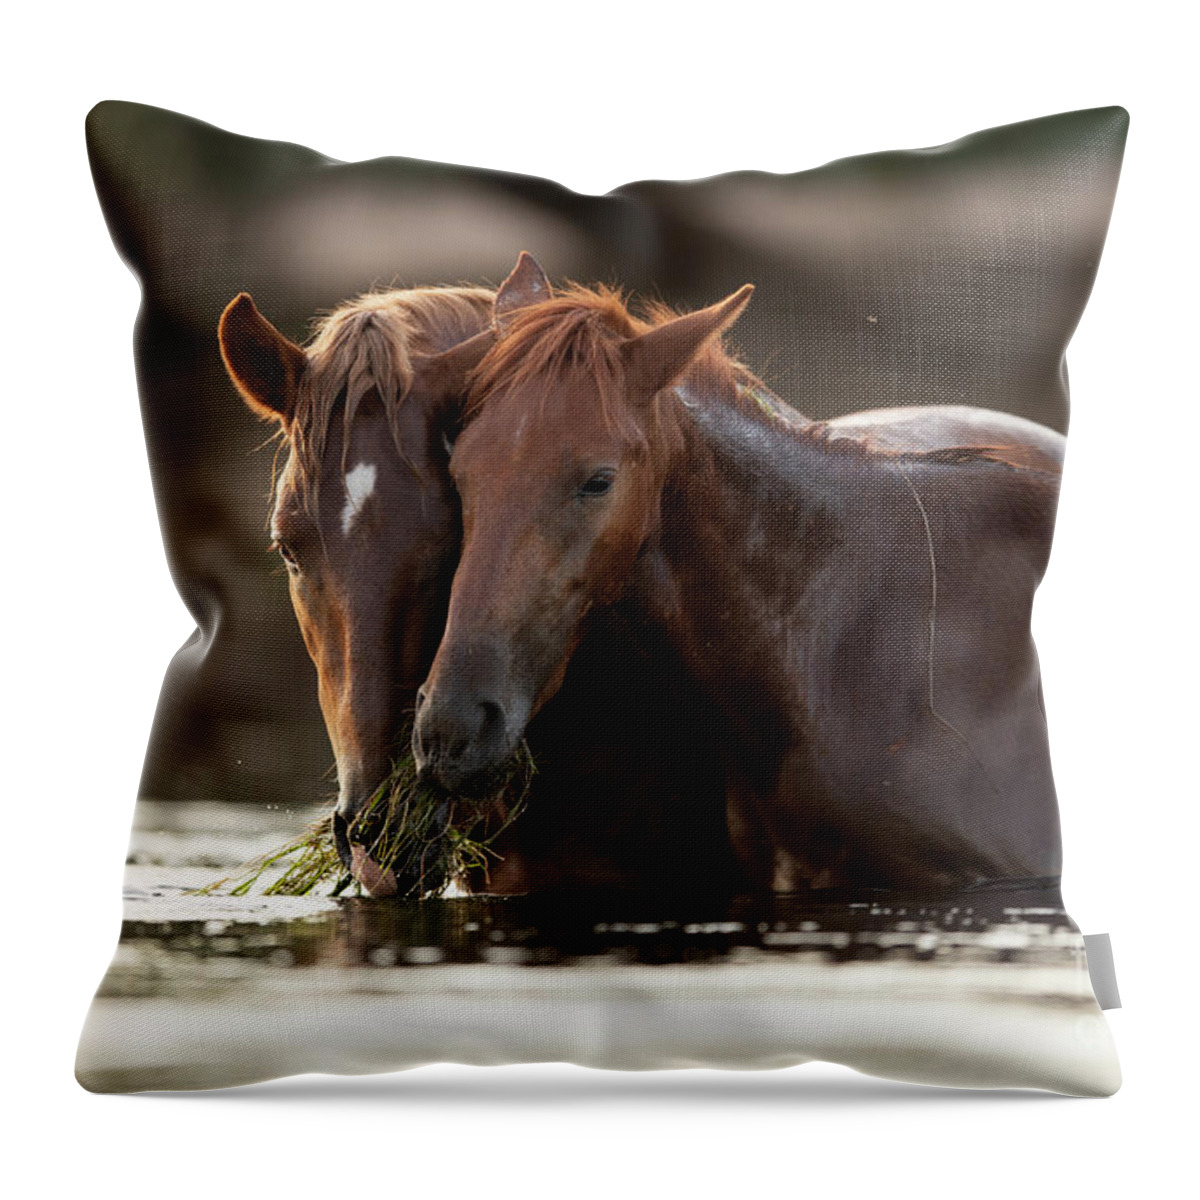 Salt River Wild Horses Throw Pillow featuring the photograph Family Dinner by Shannon Hastings